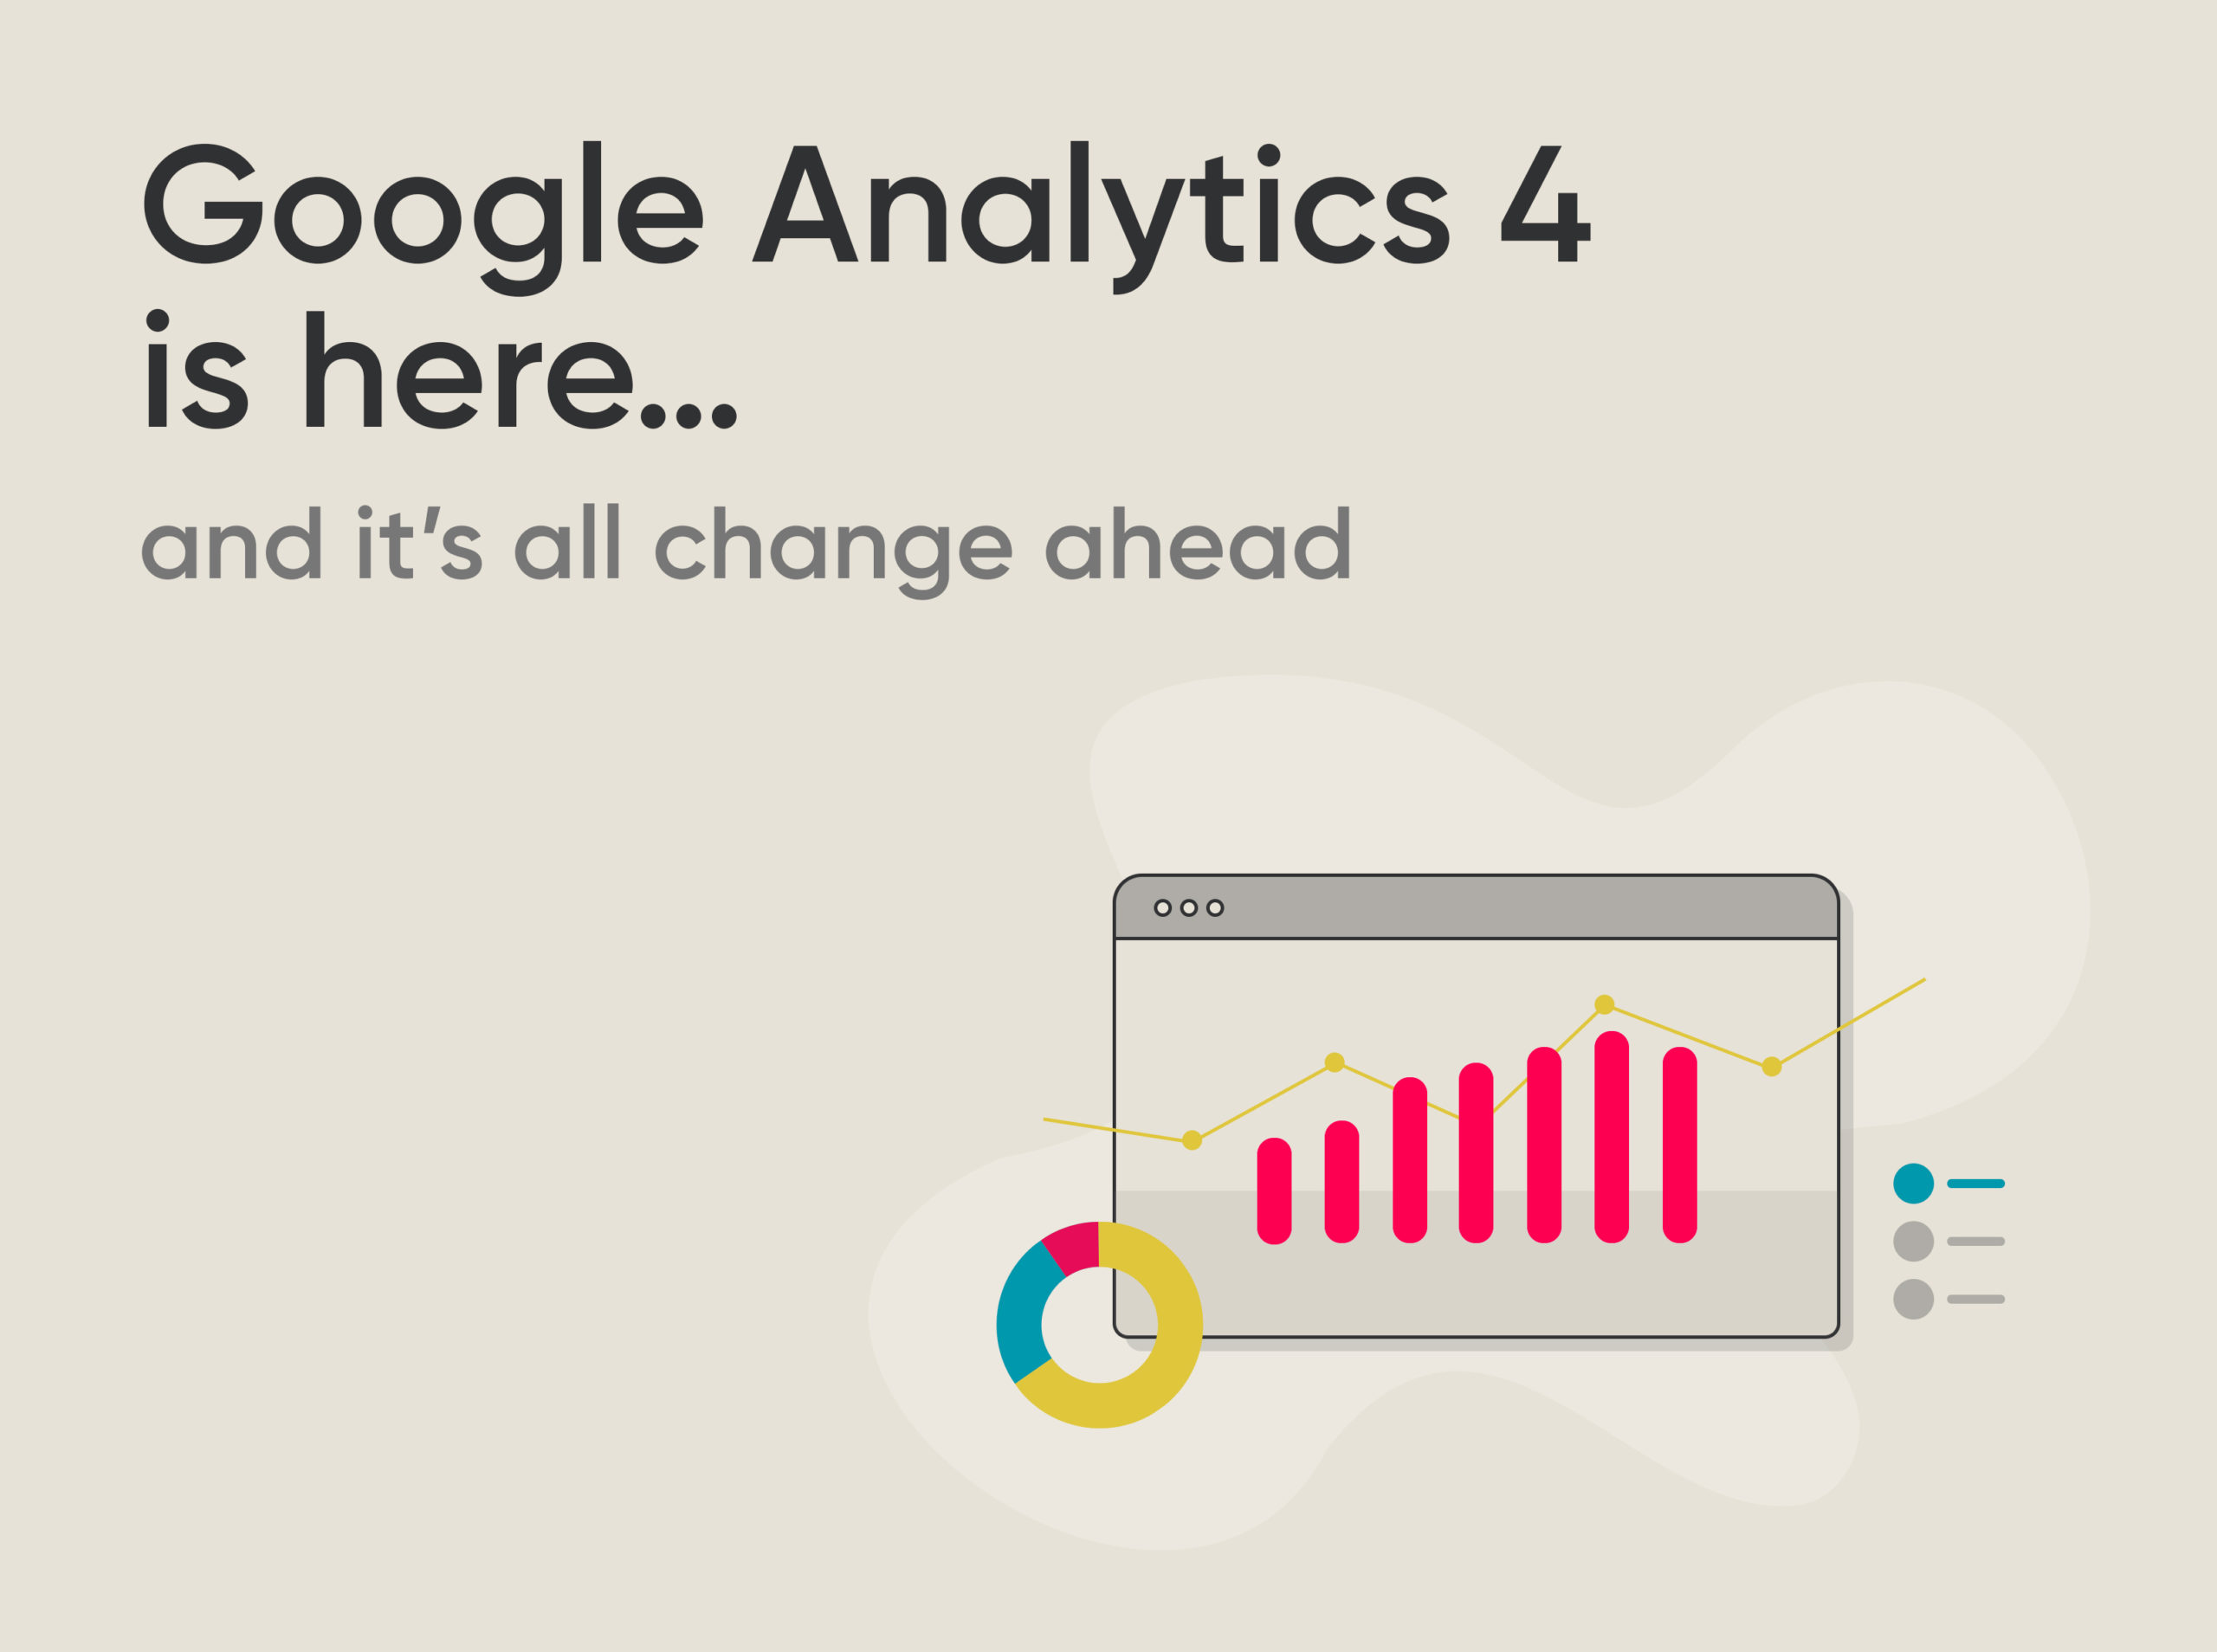 Google Analytics 4 is here and it’s all change ahead